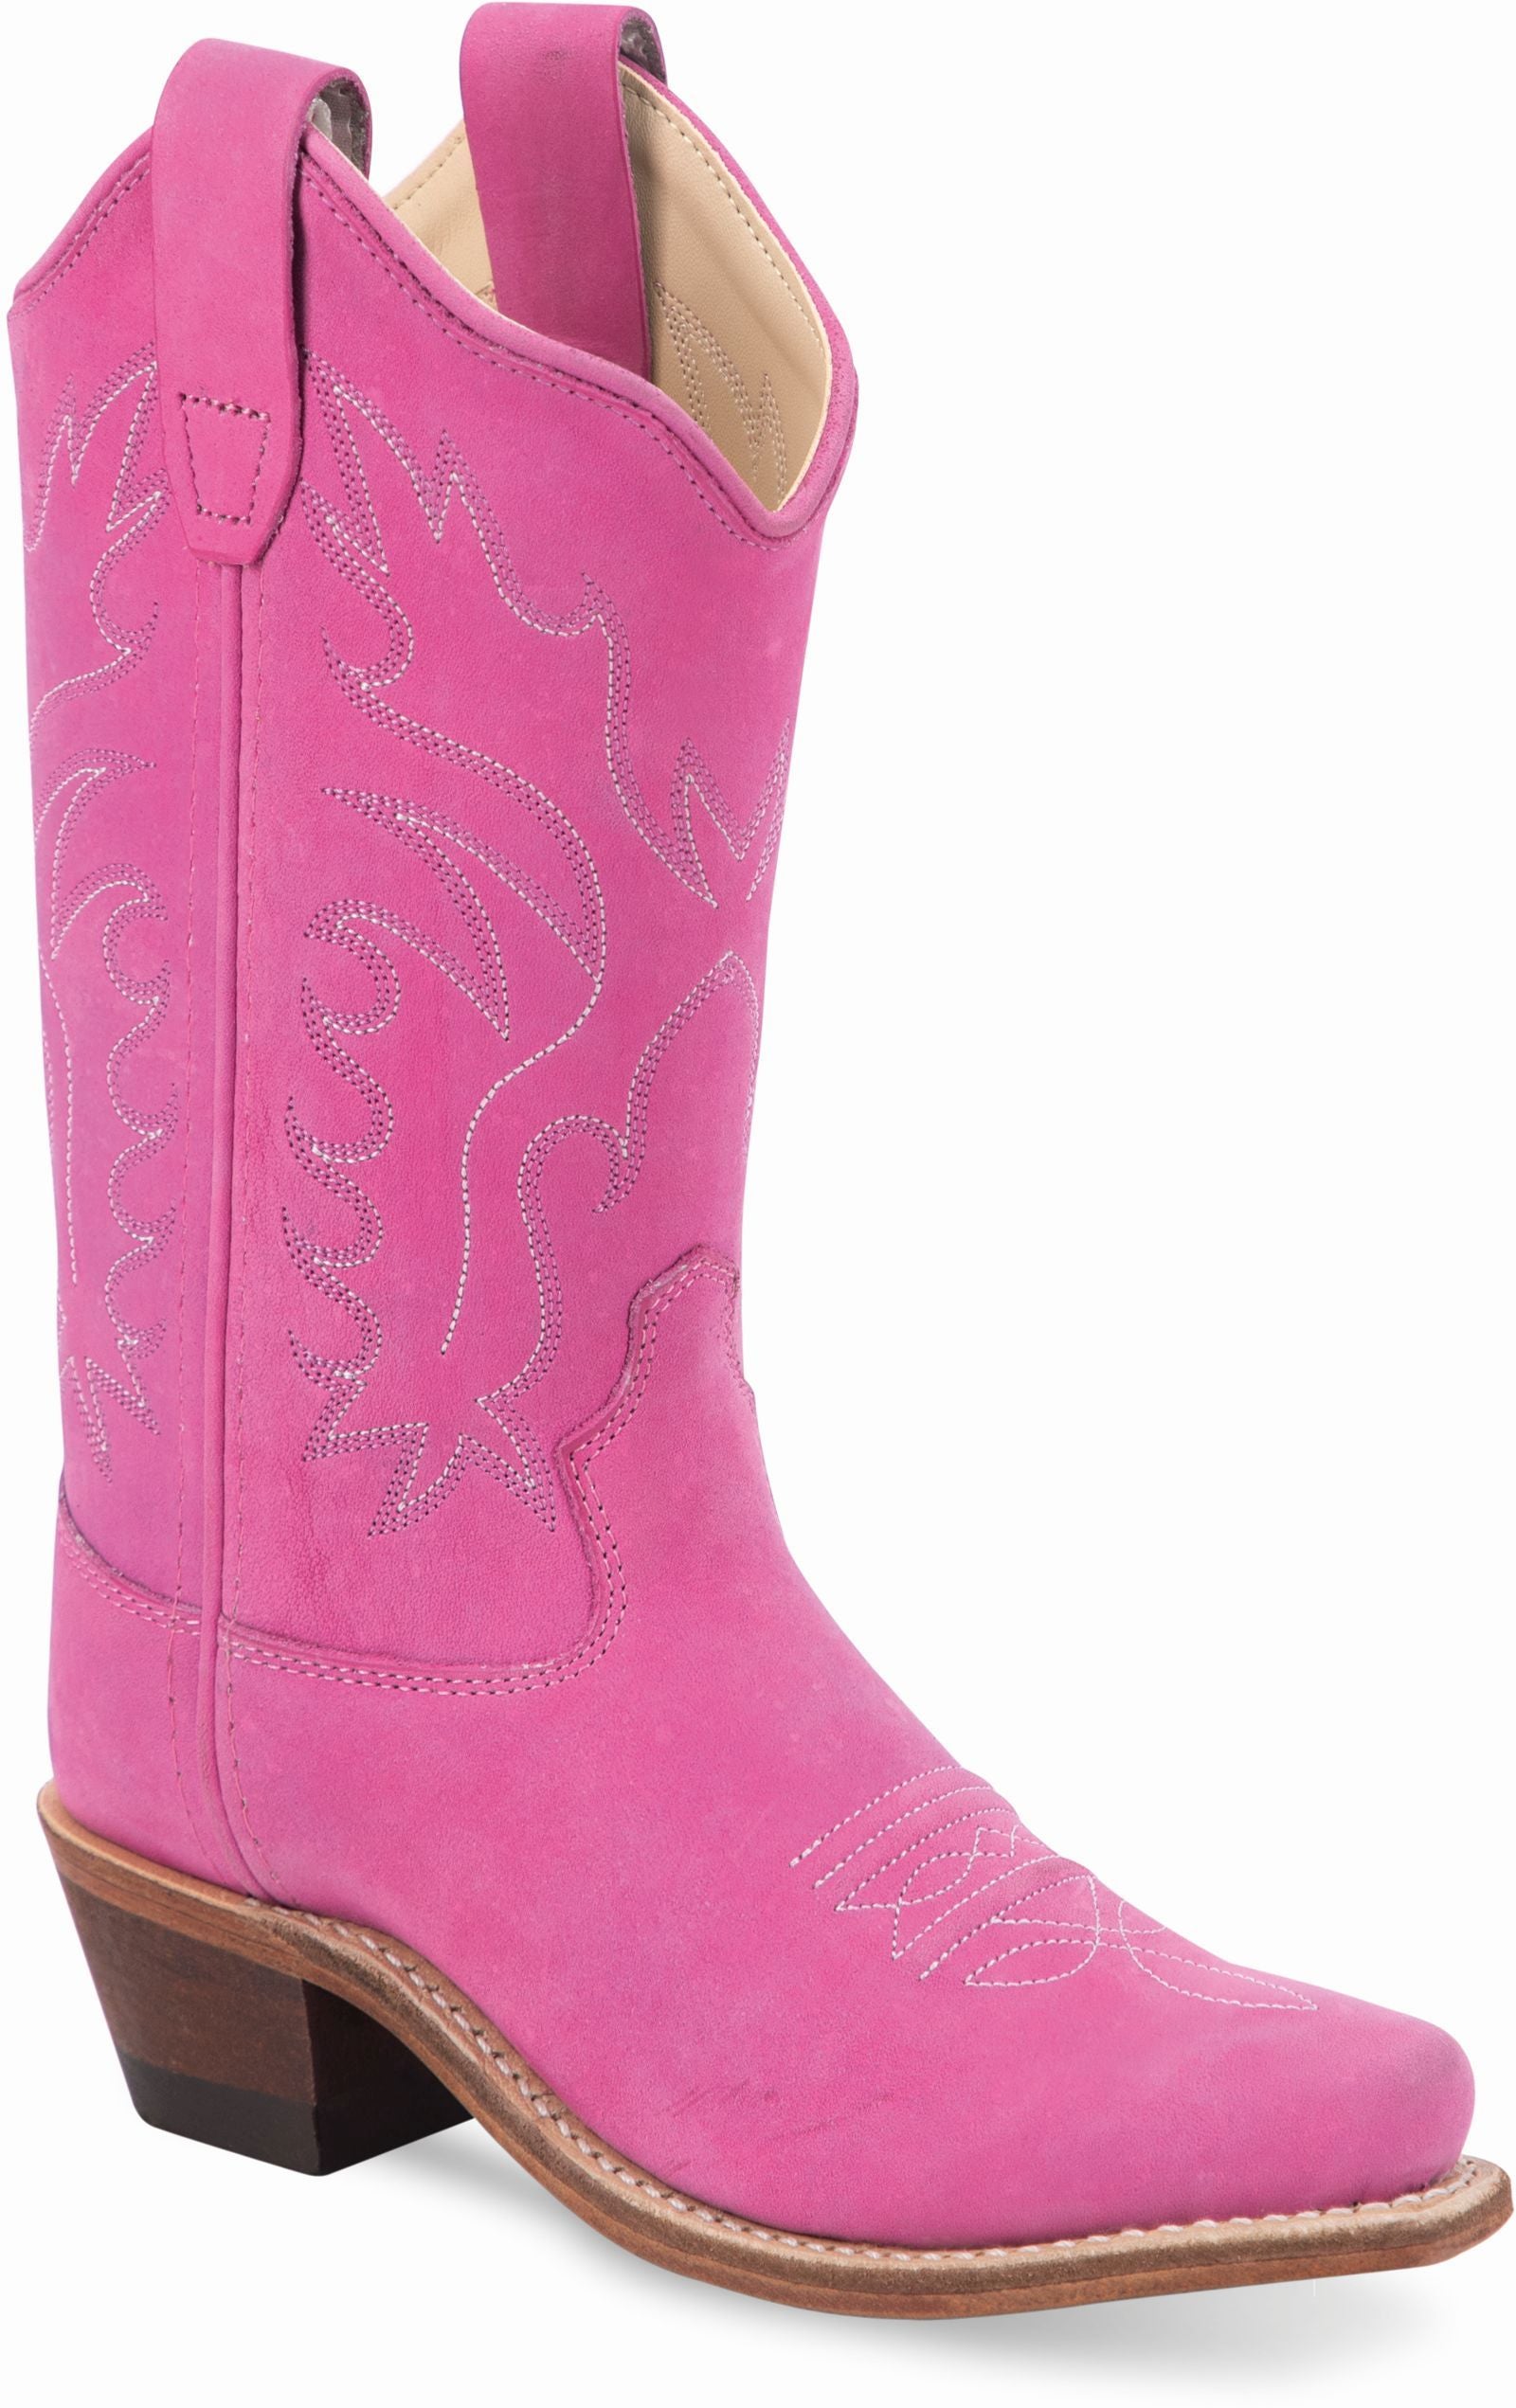 Old West Light Pink Youth's Fashion Western Boots